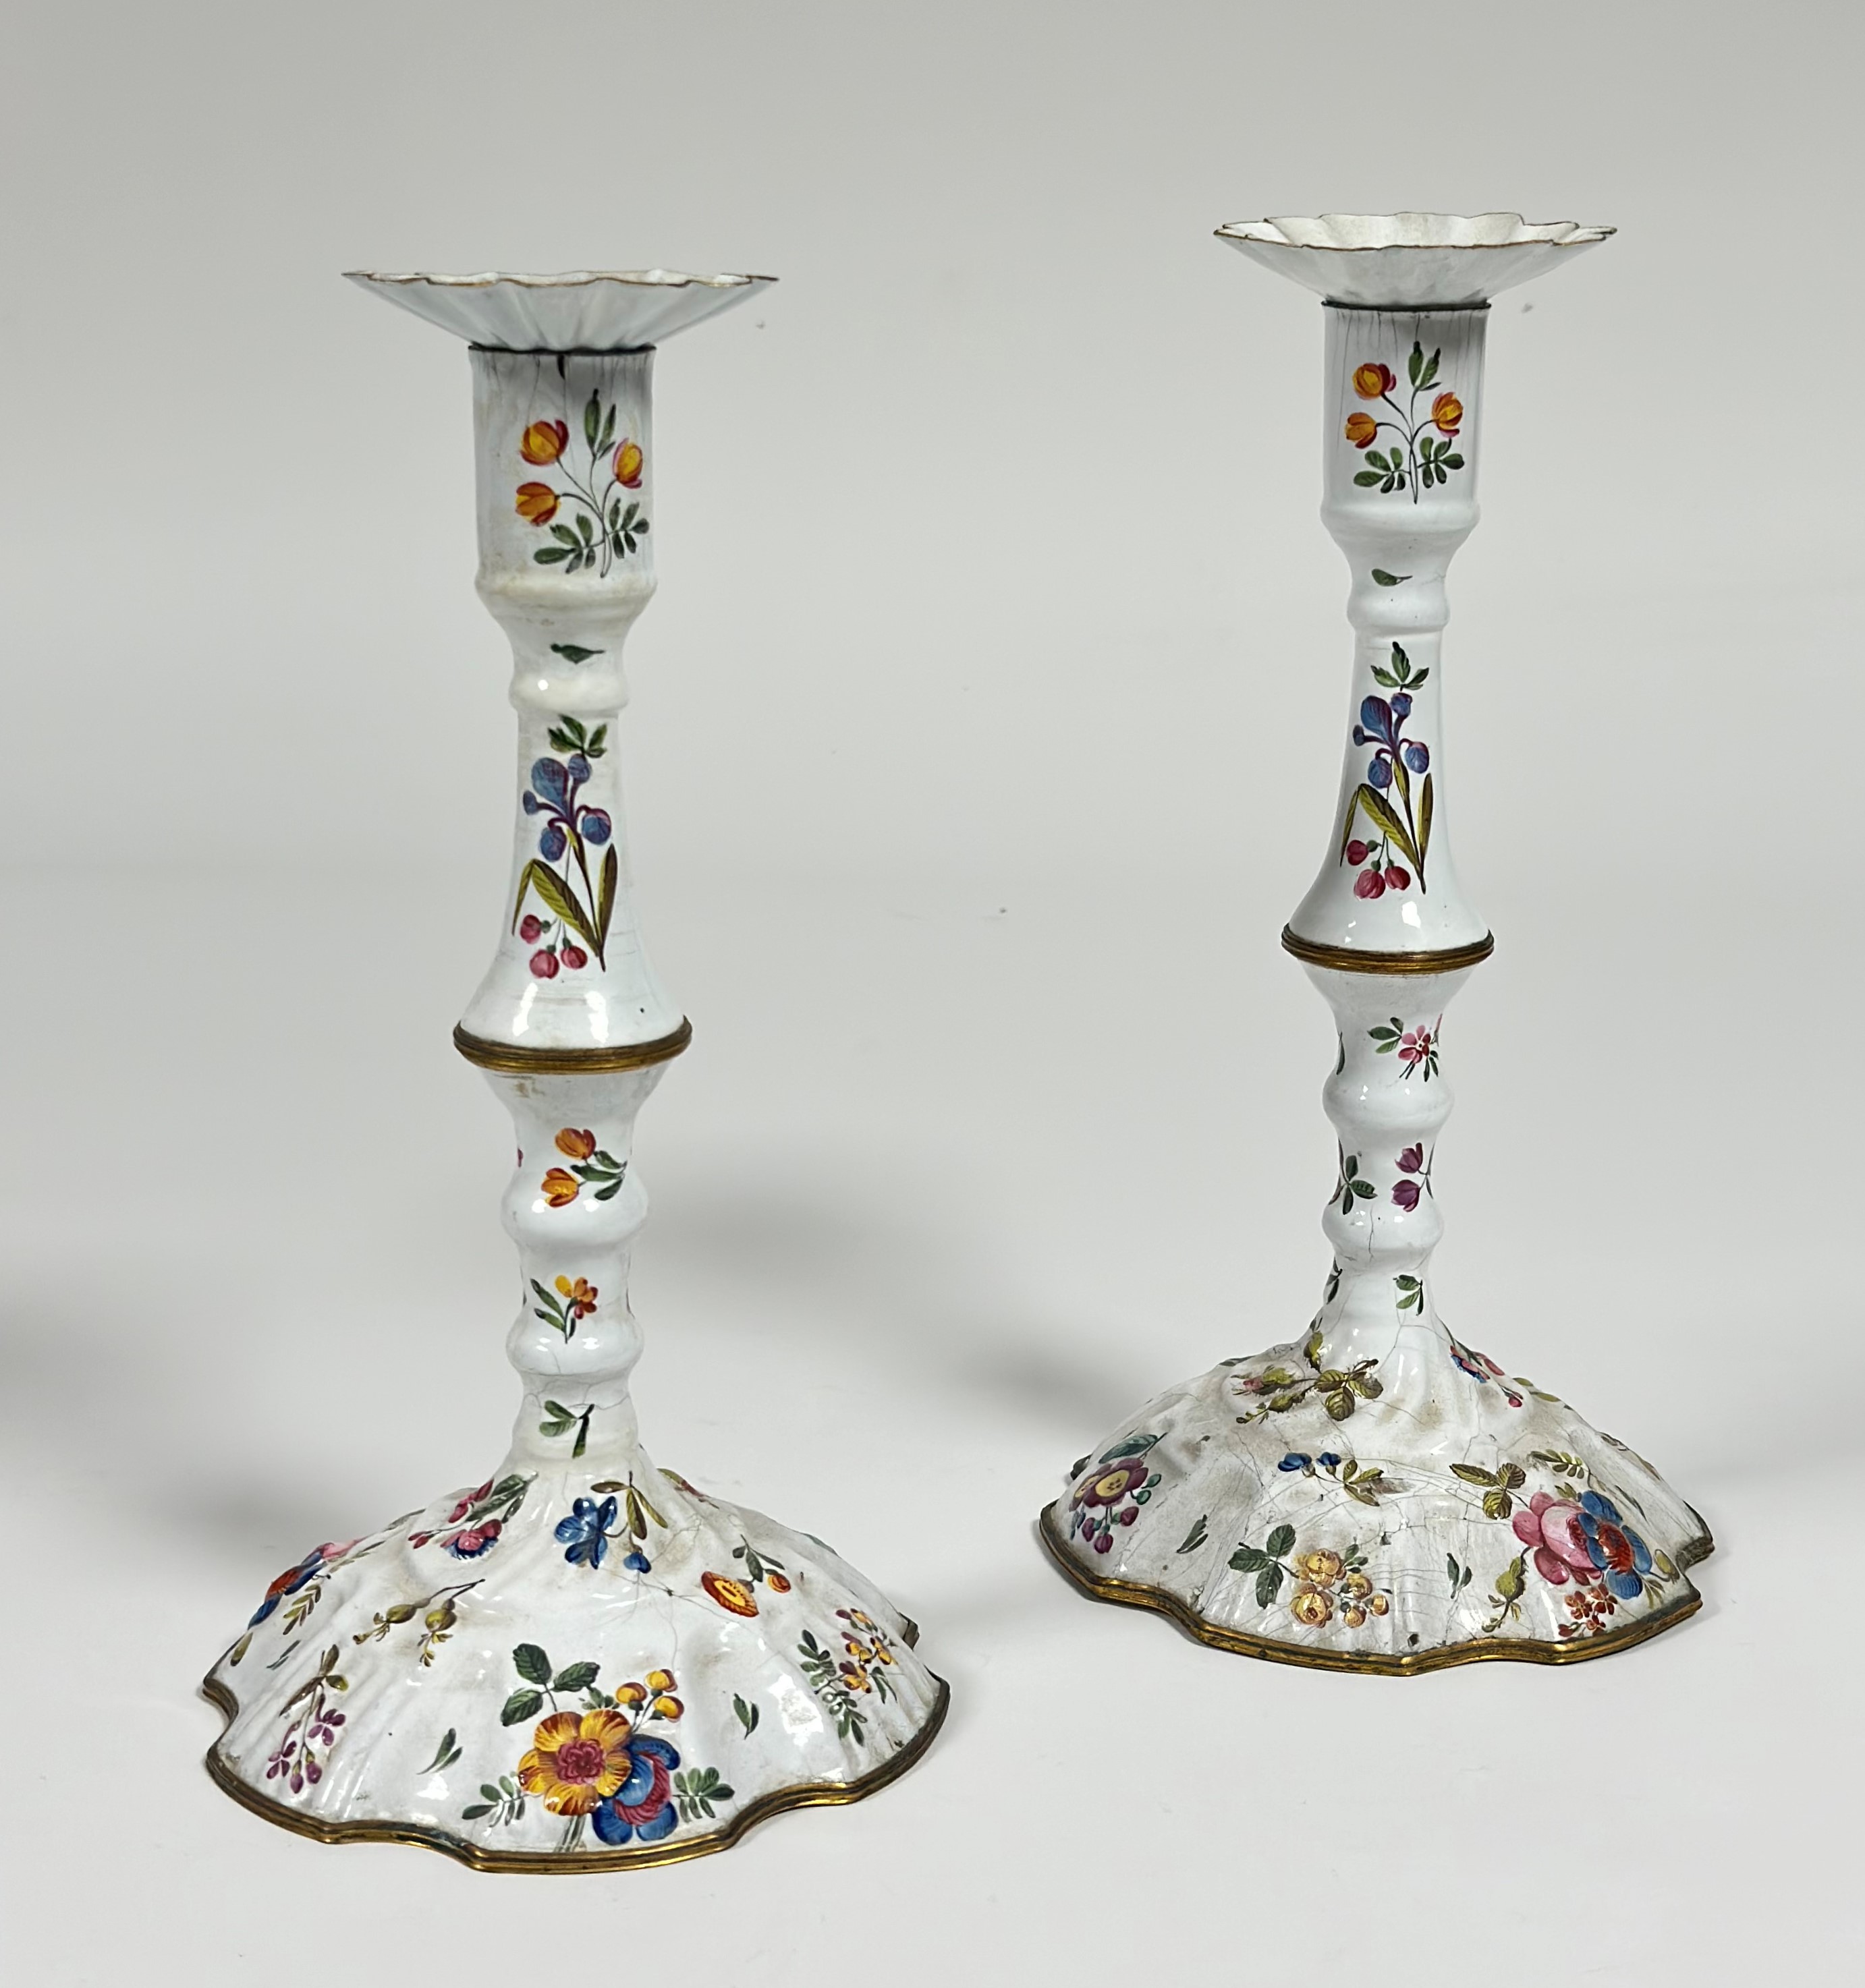 A pair of Staffordshire painted enamel candlesticks, last quarter of the 18th century, in two